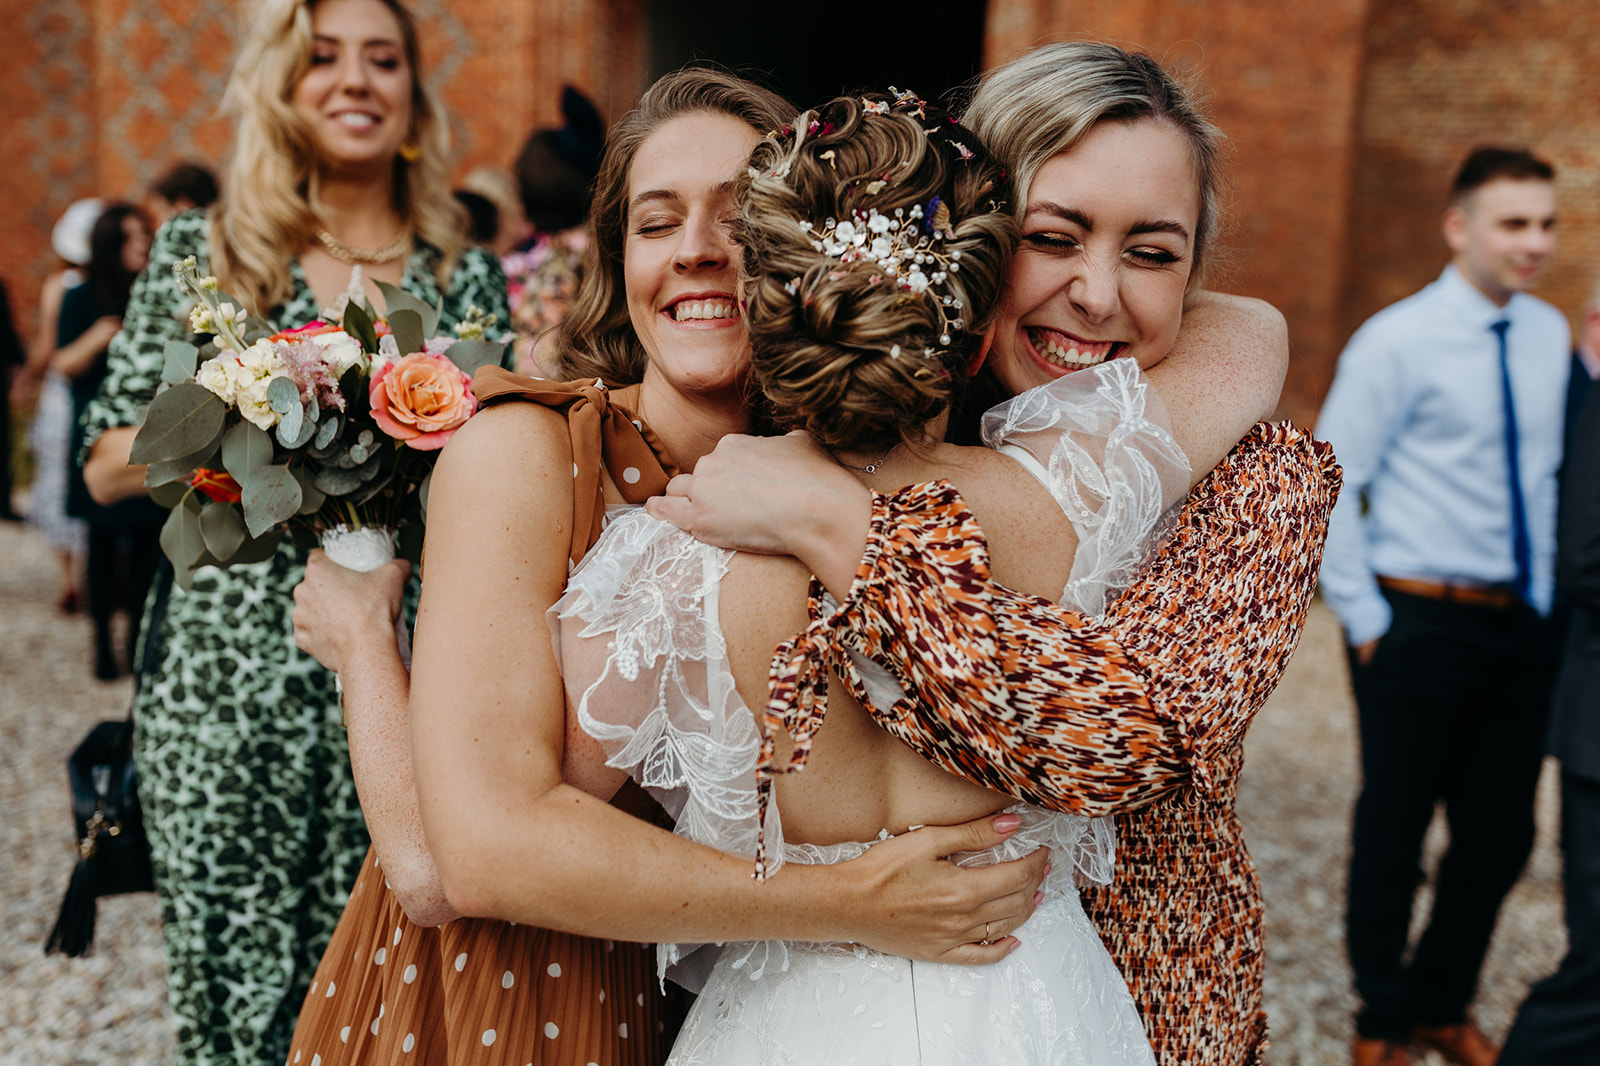 Natural wedding moment of Bride hugging two cheerful friends with bouquets, surrounded by guests in the background.